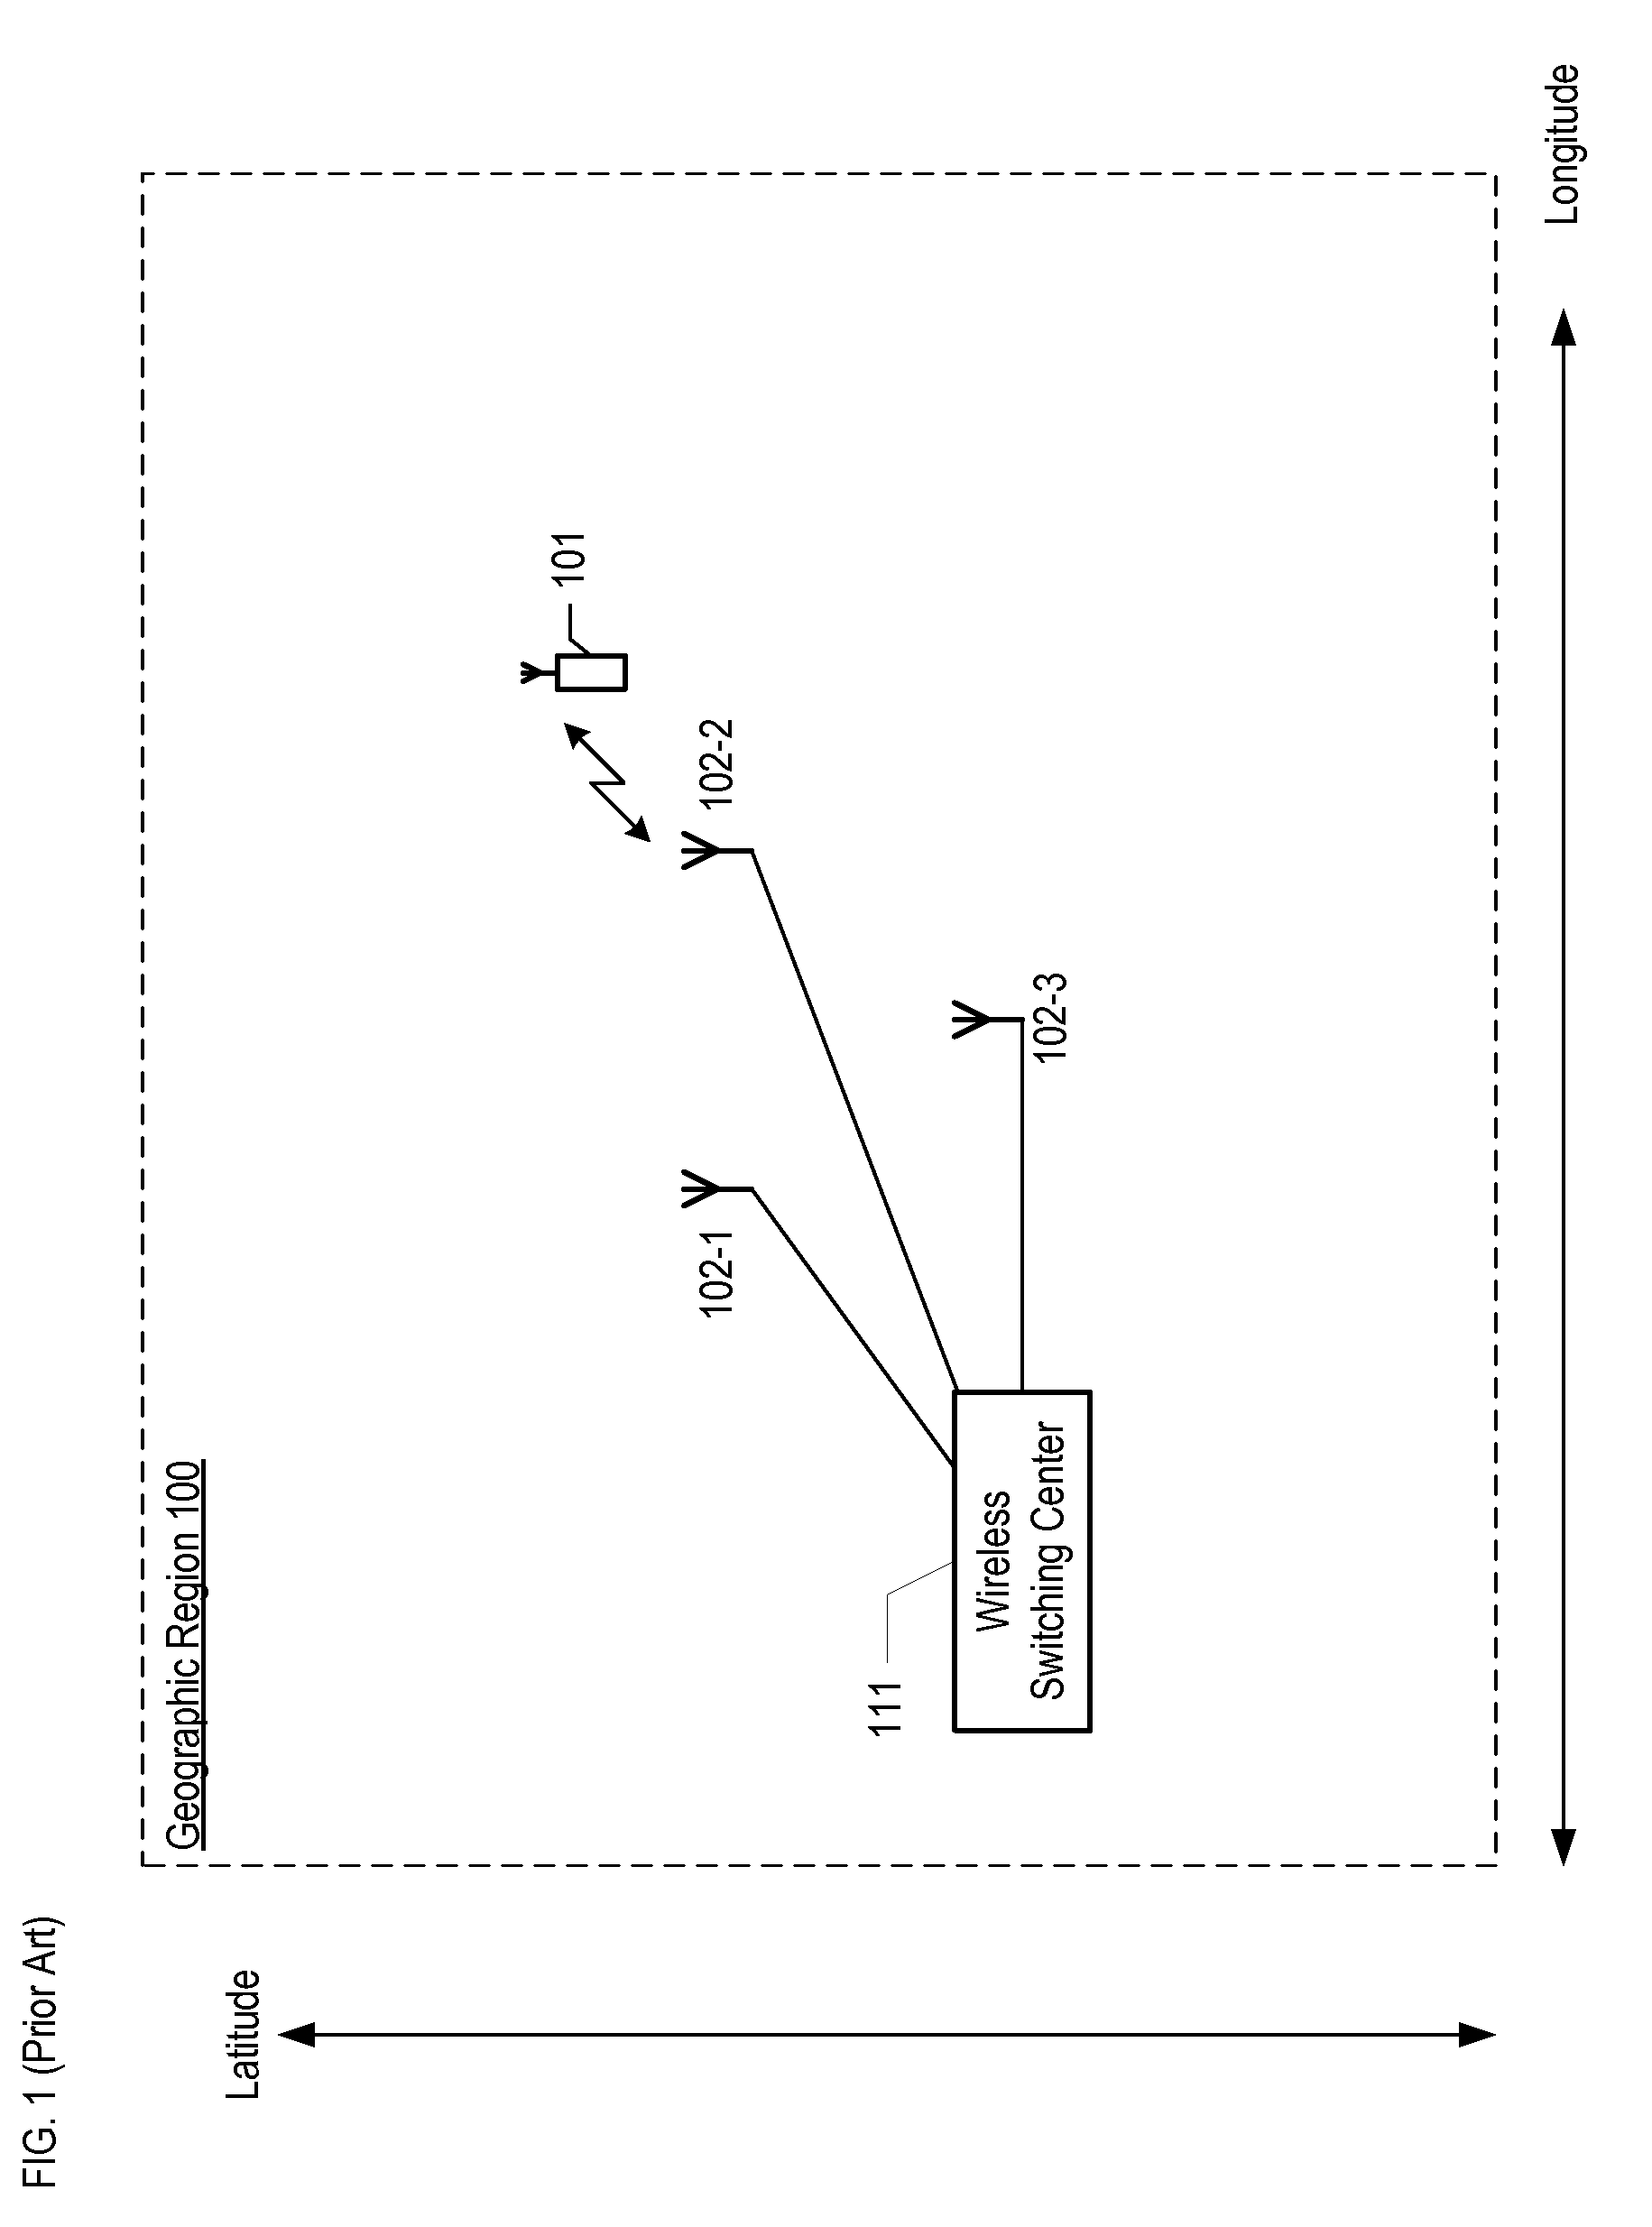 Location Estimation of Wireless Terminals Through Pattern Matching of Signal-Strength Differentials